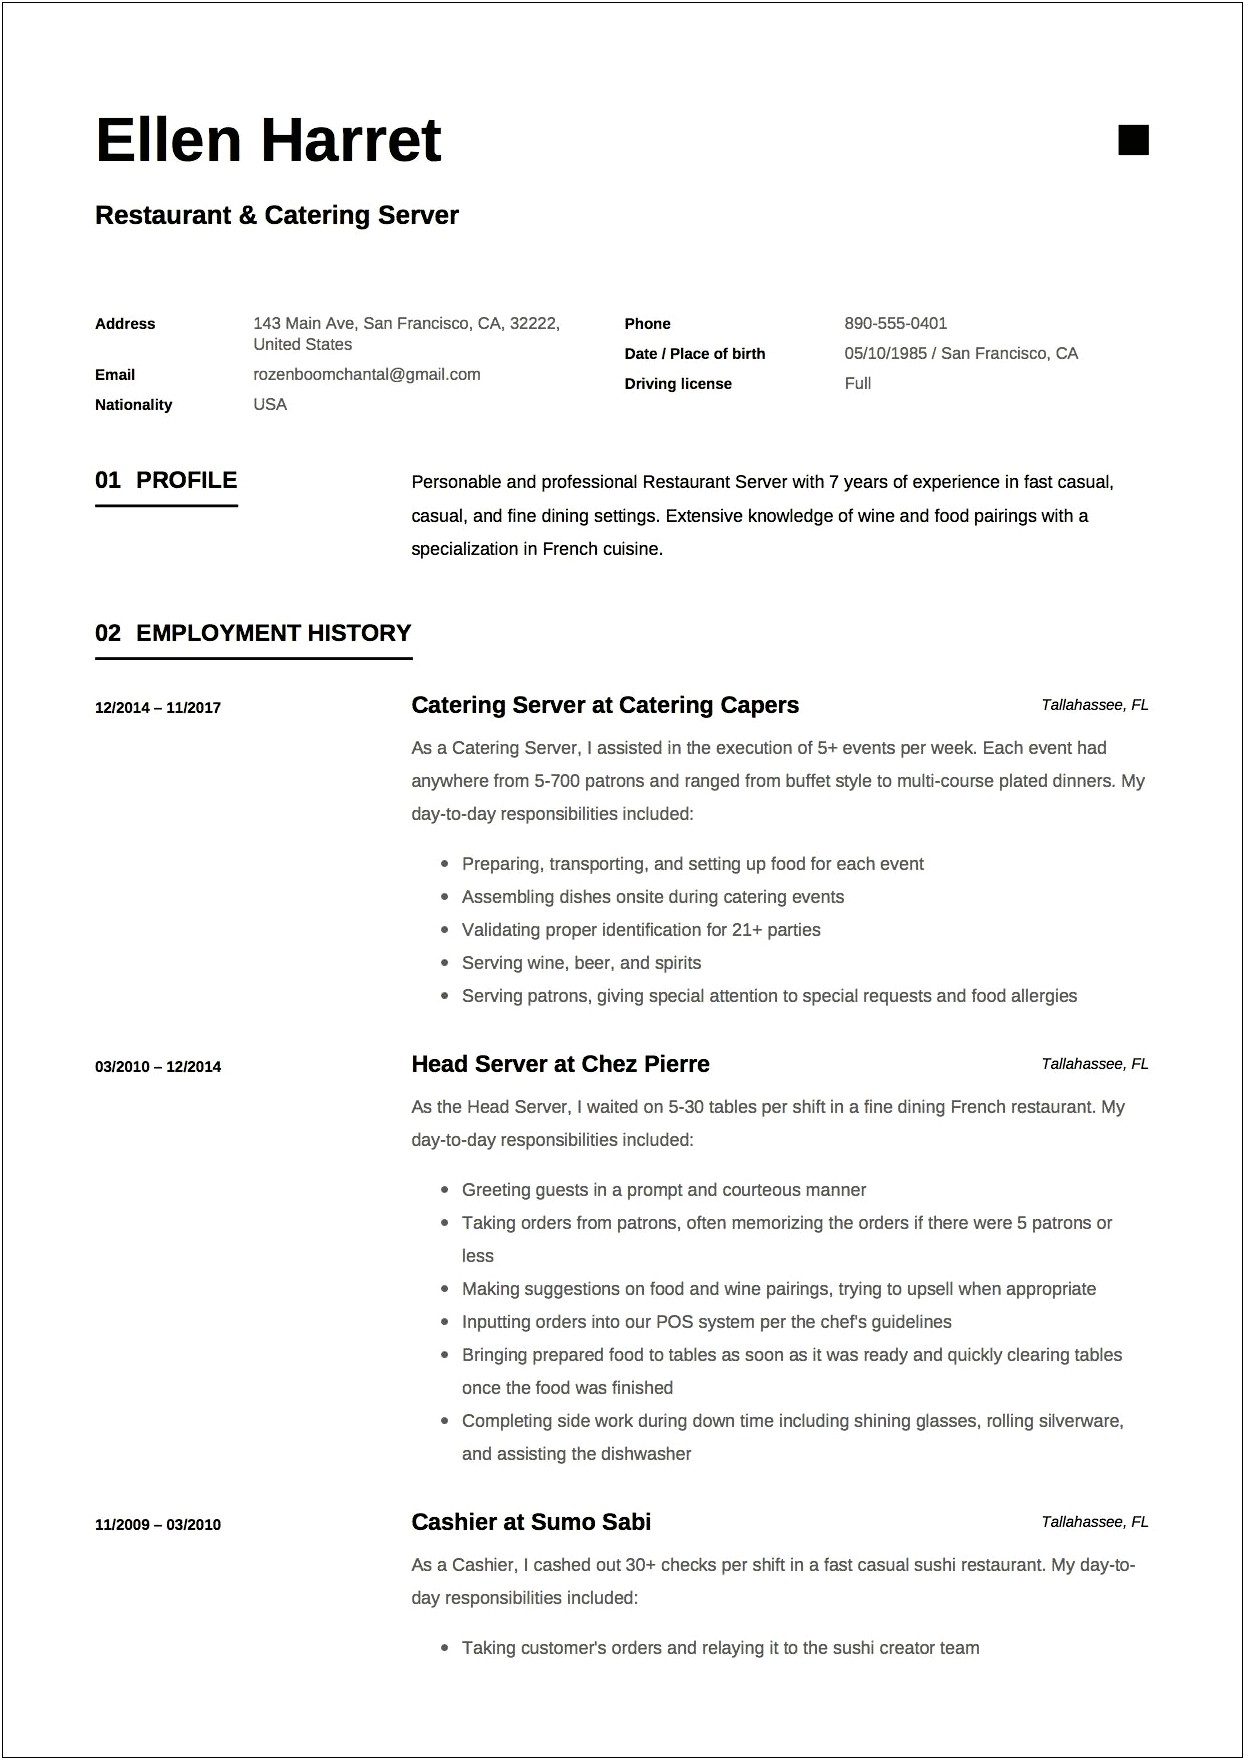 Resume Summary Sample For A Server